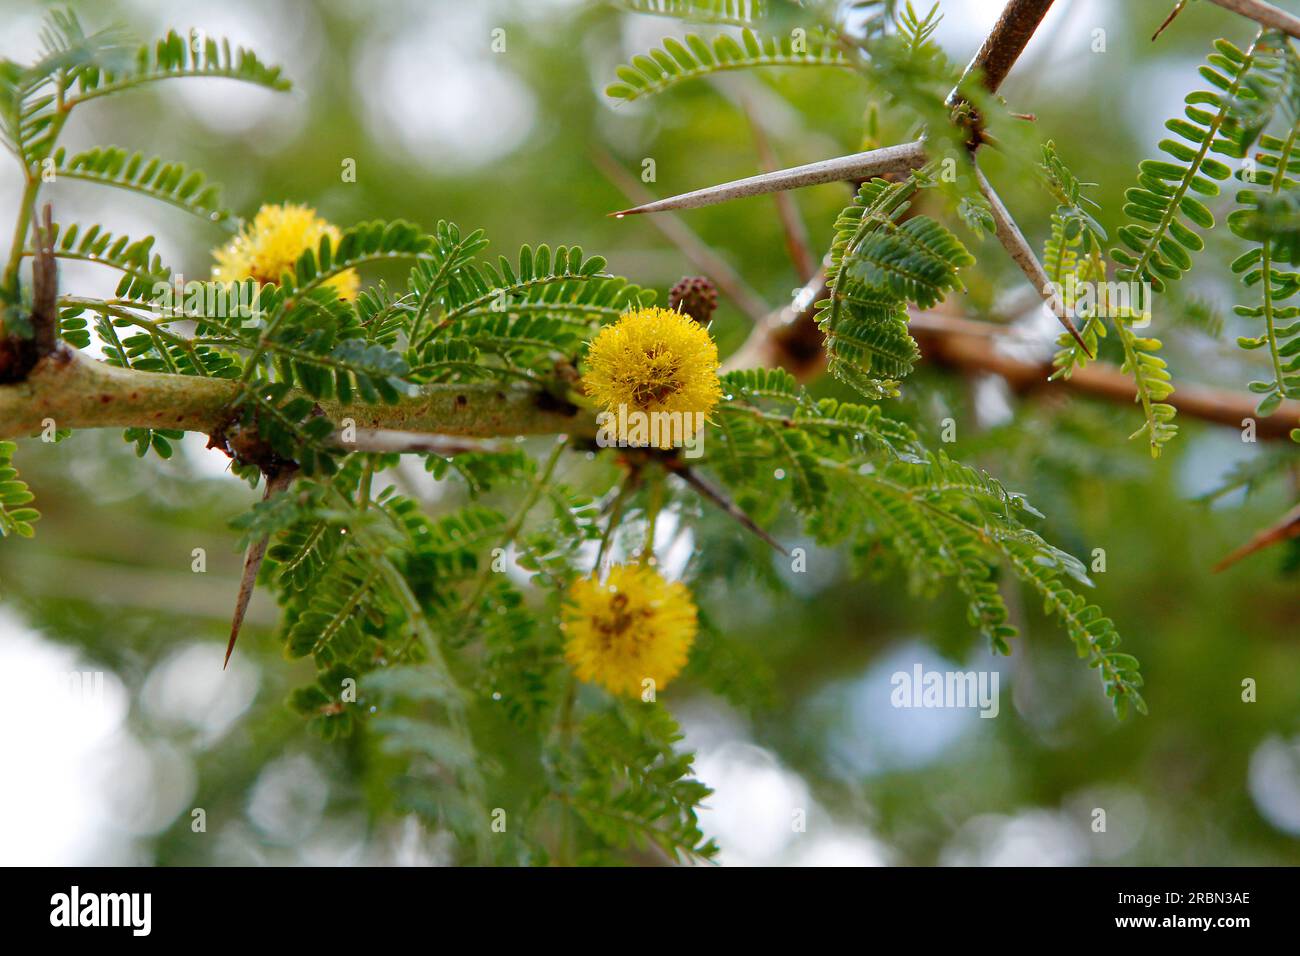 Fever tree spikes and yellow flowers photographed in the sun. Stock Photo